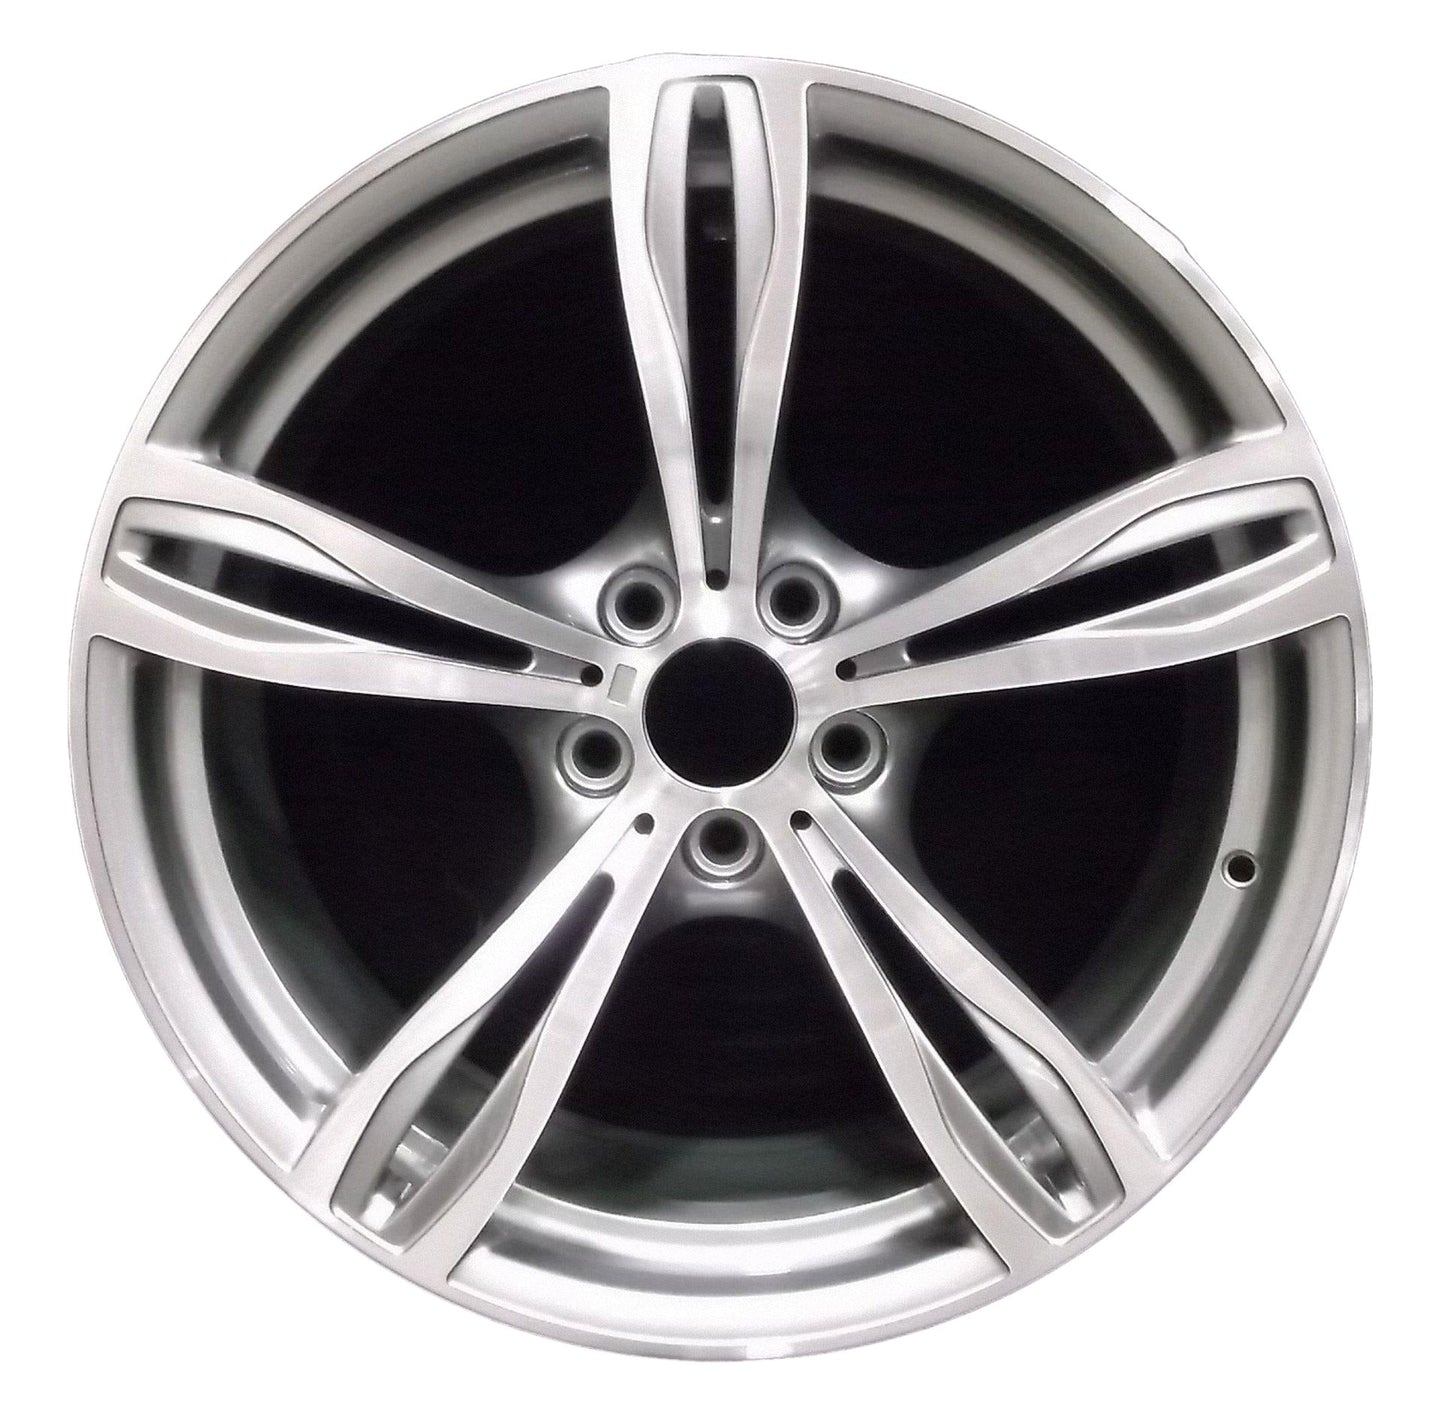 BMW M5  2012, 2013, 2014, 2015, 2016 Factory OEM Car Wheel Size 20x9 Alloy WAO.71560FT.LC25.MABRT